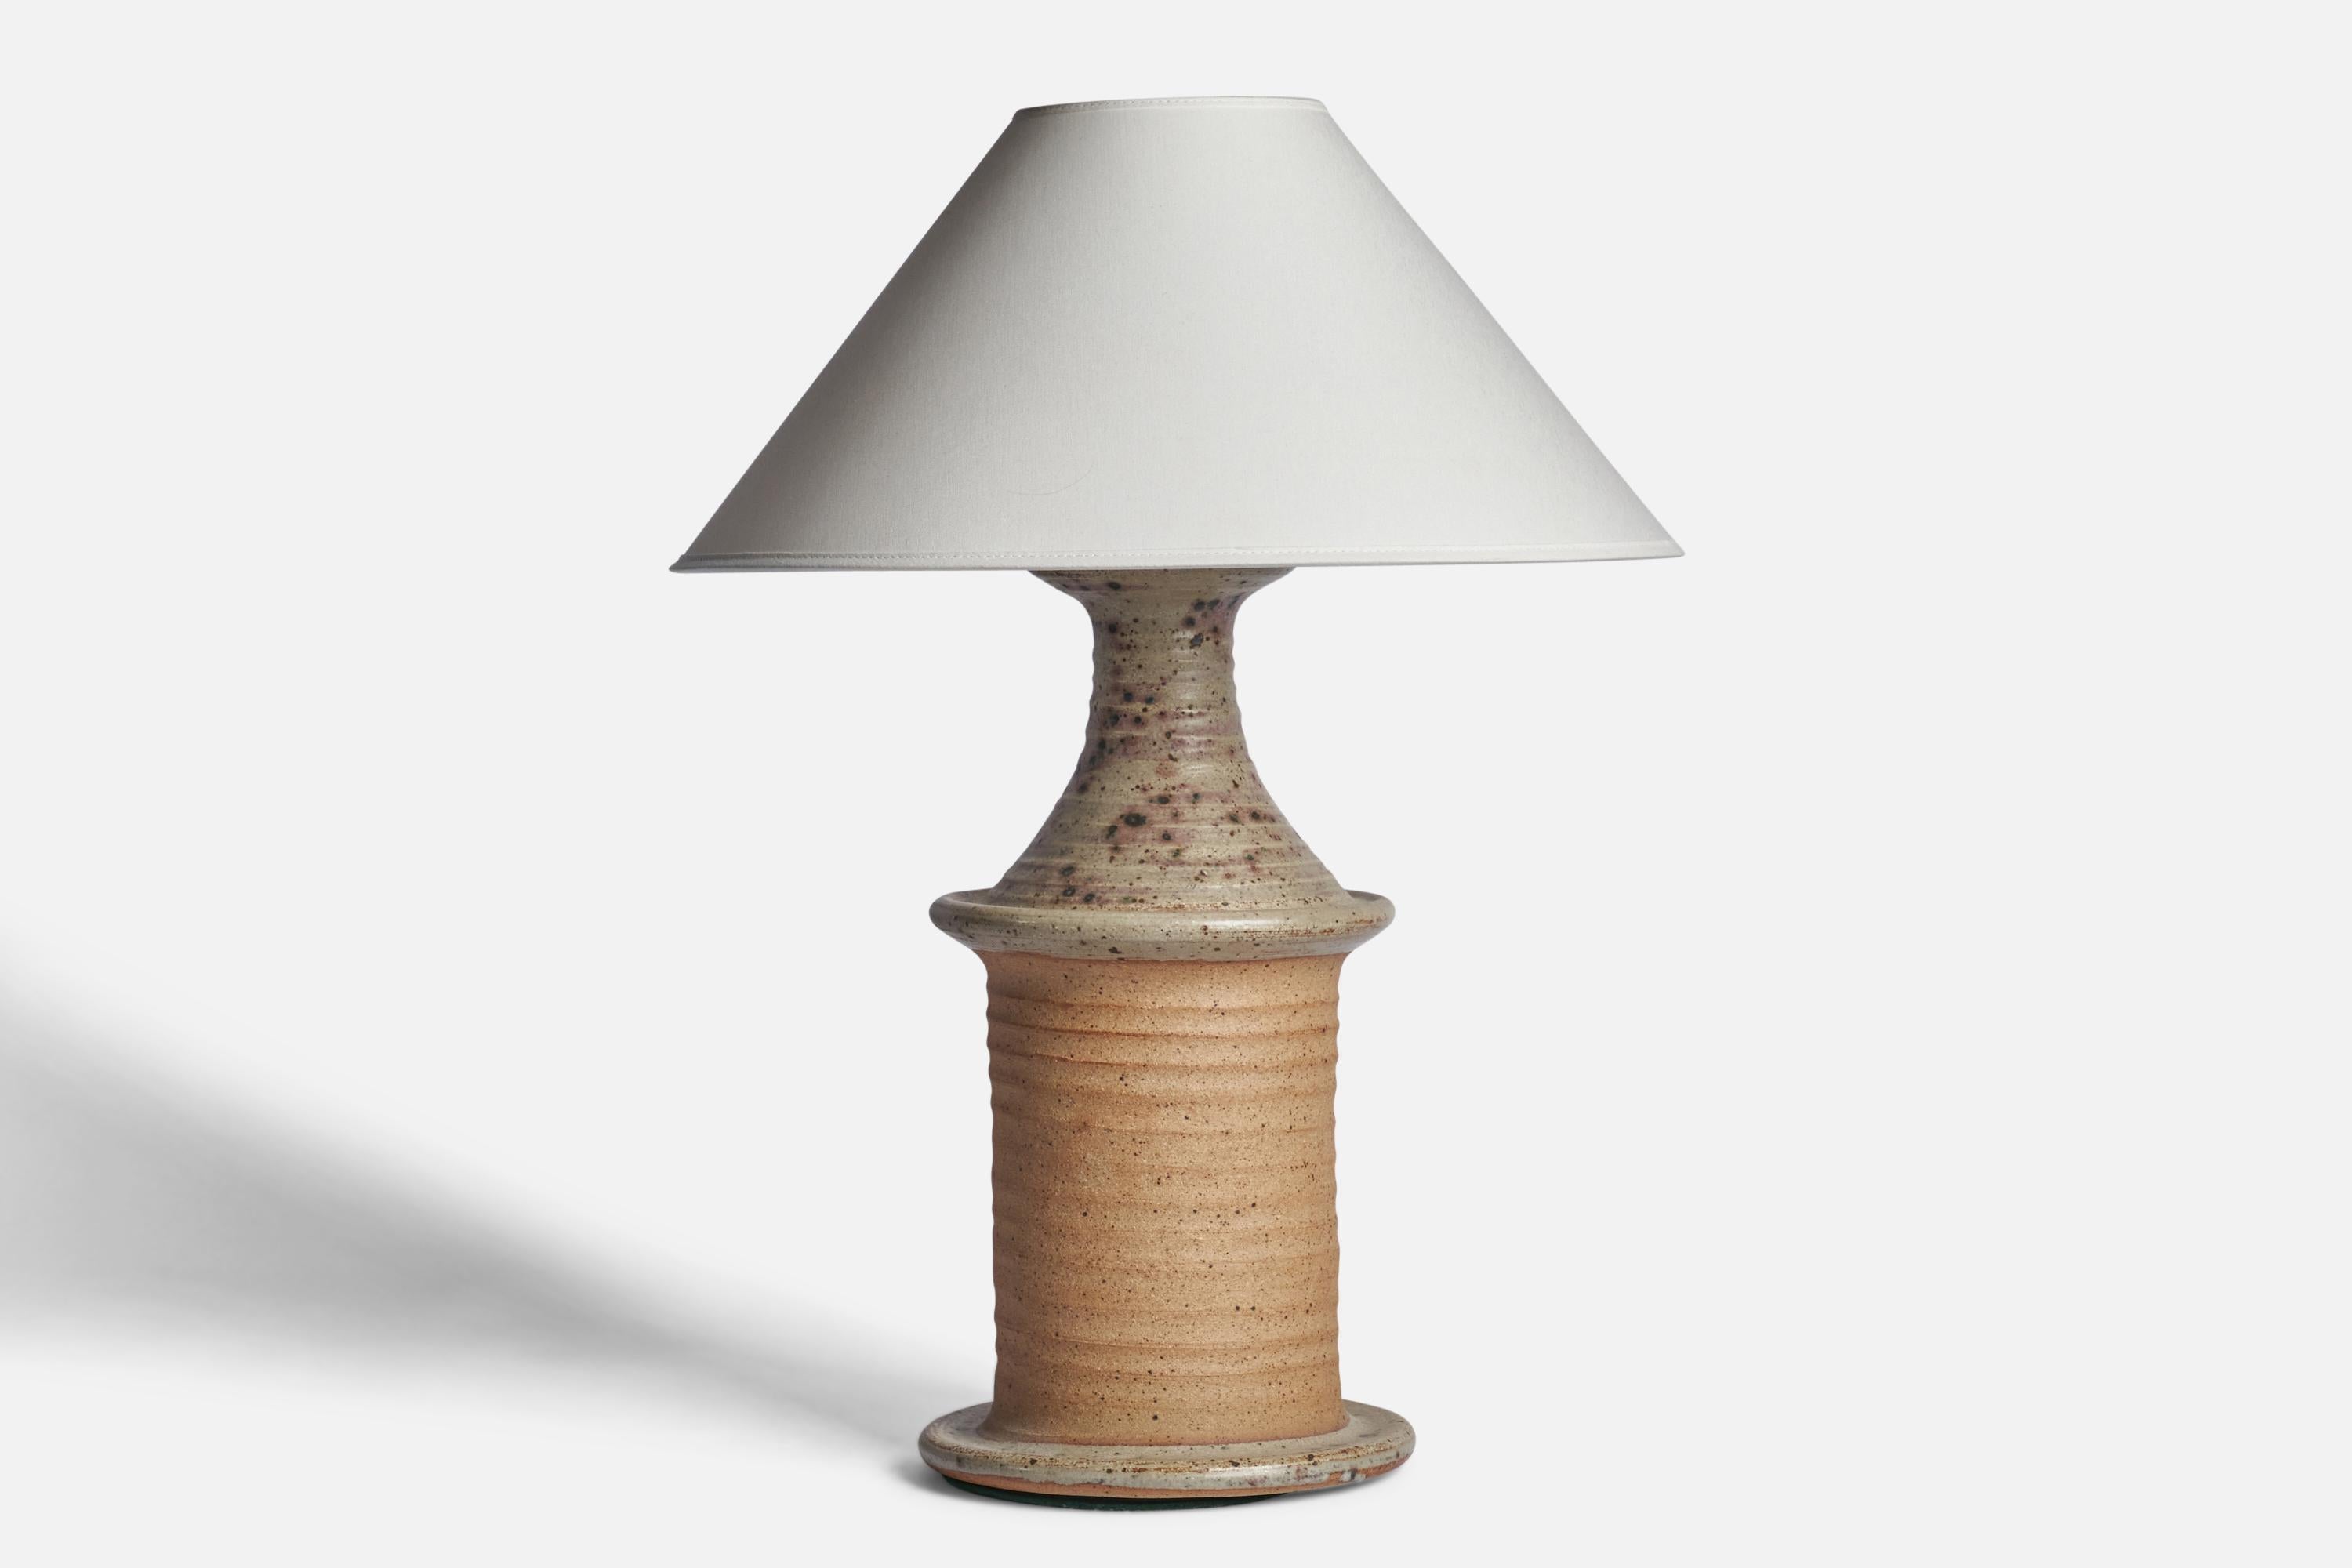 A grey and beige-glazed stoneware table lamp designed and produced by Tue Poulsen, Denmark, 1970s.

Dimensions of Lamp (inches): 16.5